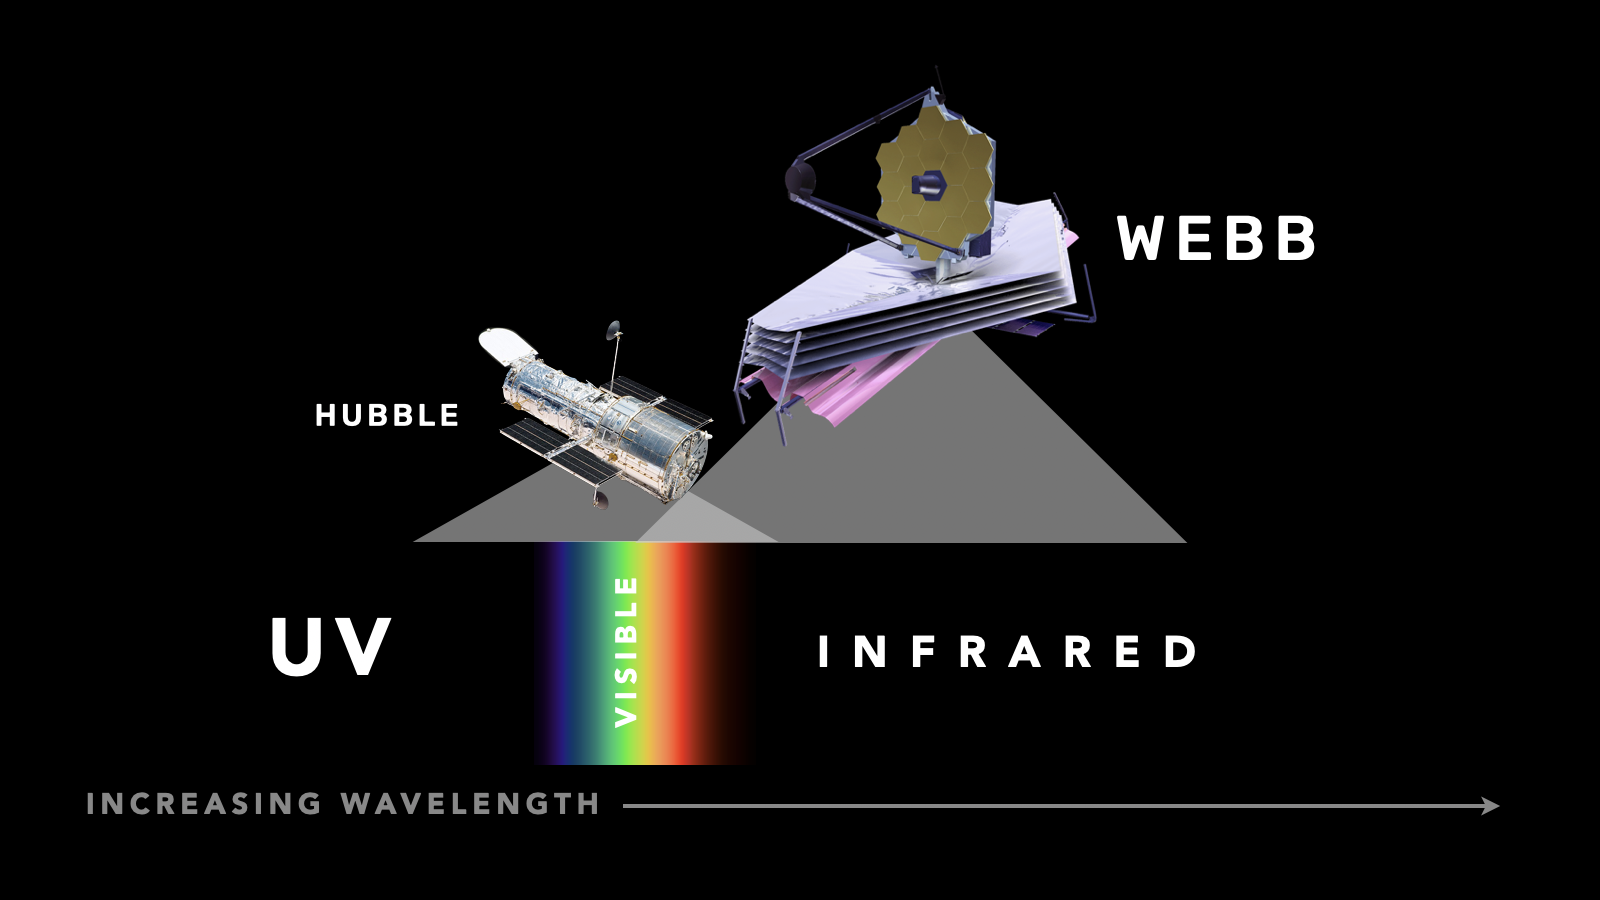 Wavelengths observable by Webb and Hubble.